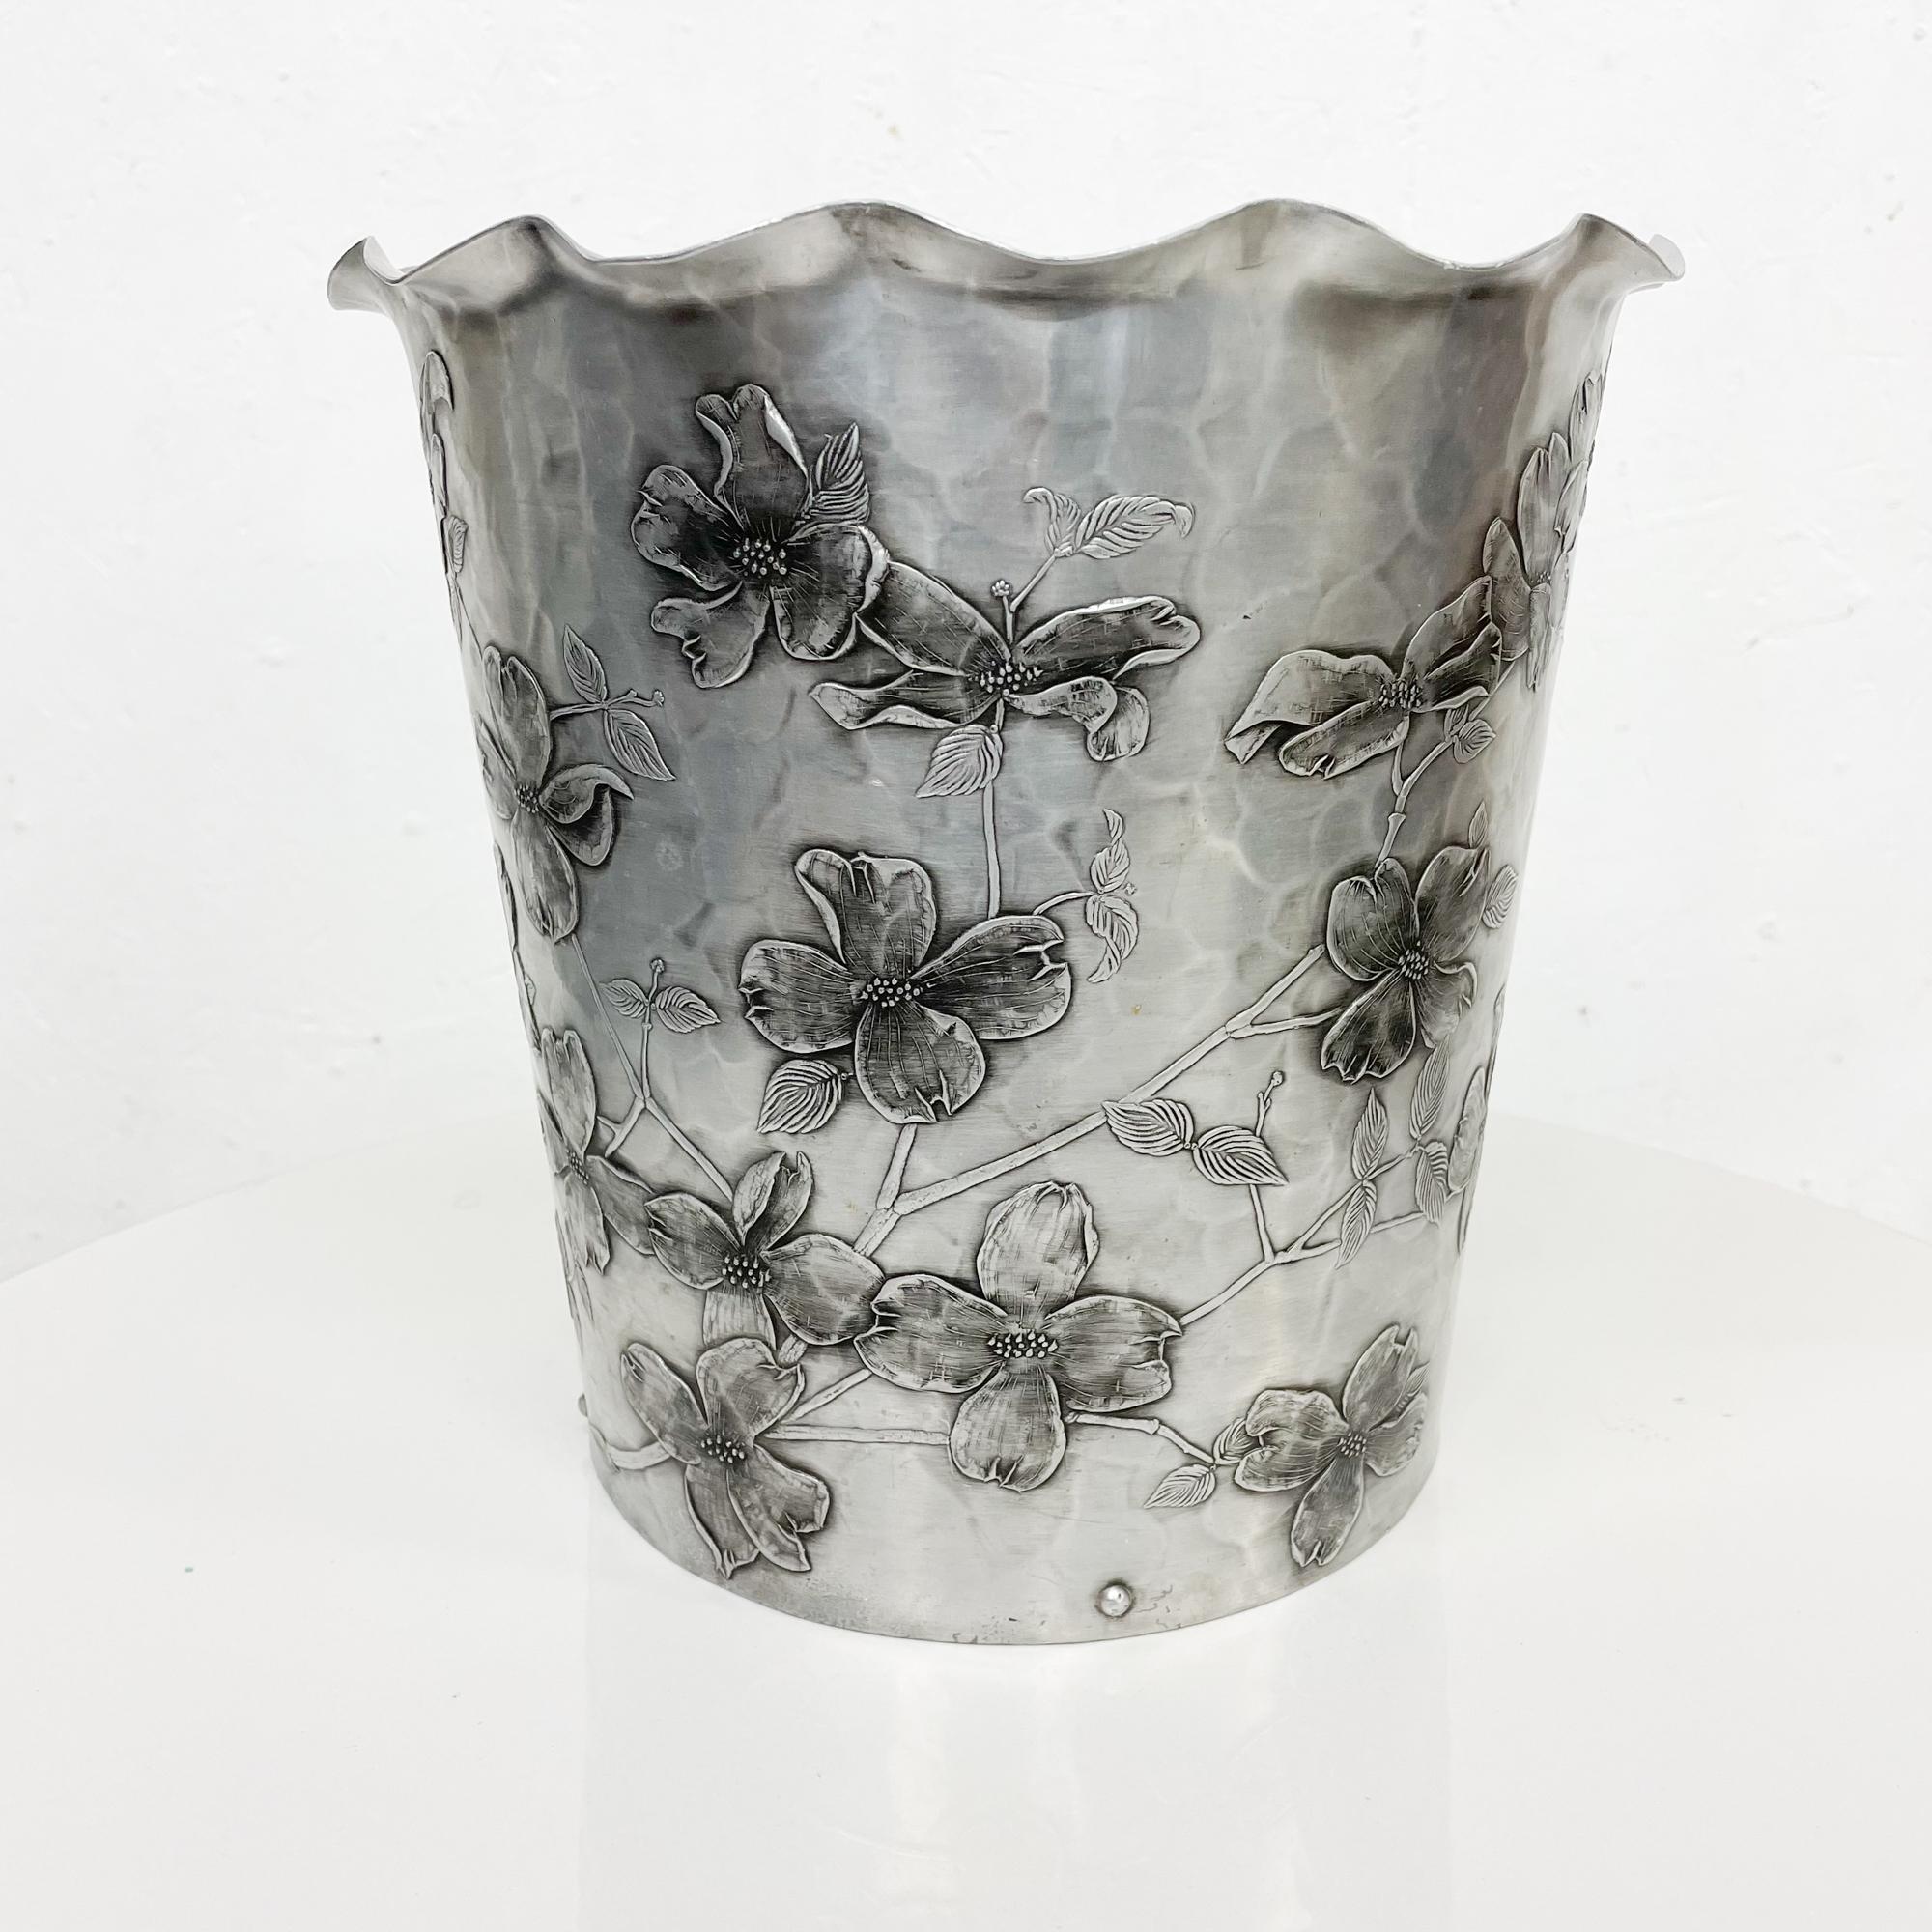 Waste basket
By Wendell August forge decorative scalloped dogwood waste basket trash can 1960s
Handmade hammered aluminum and riveted art iron.
Measures: 10.25 tall x 10.5 inches
Maker stamped Grove City PA
Original preowned unrestored very